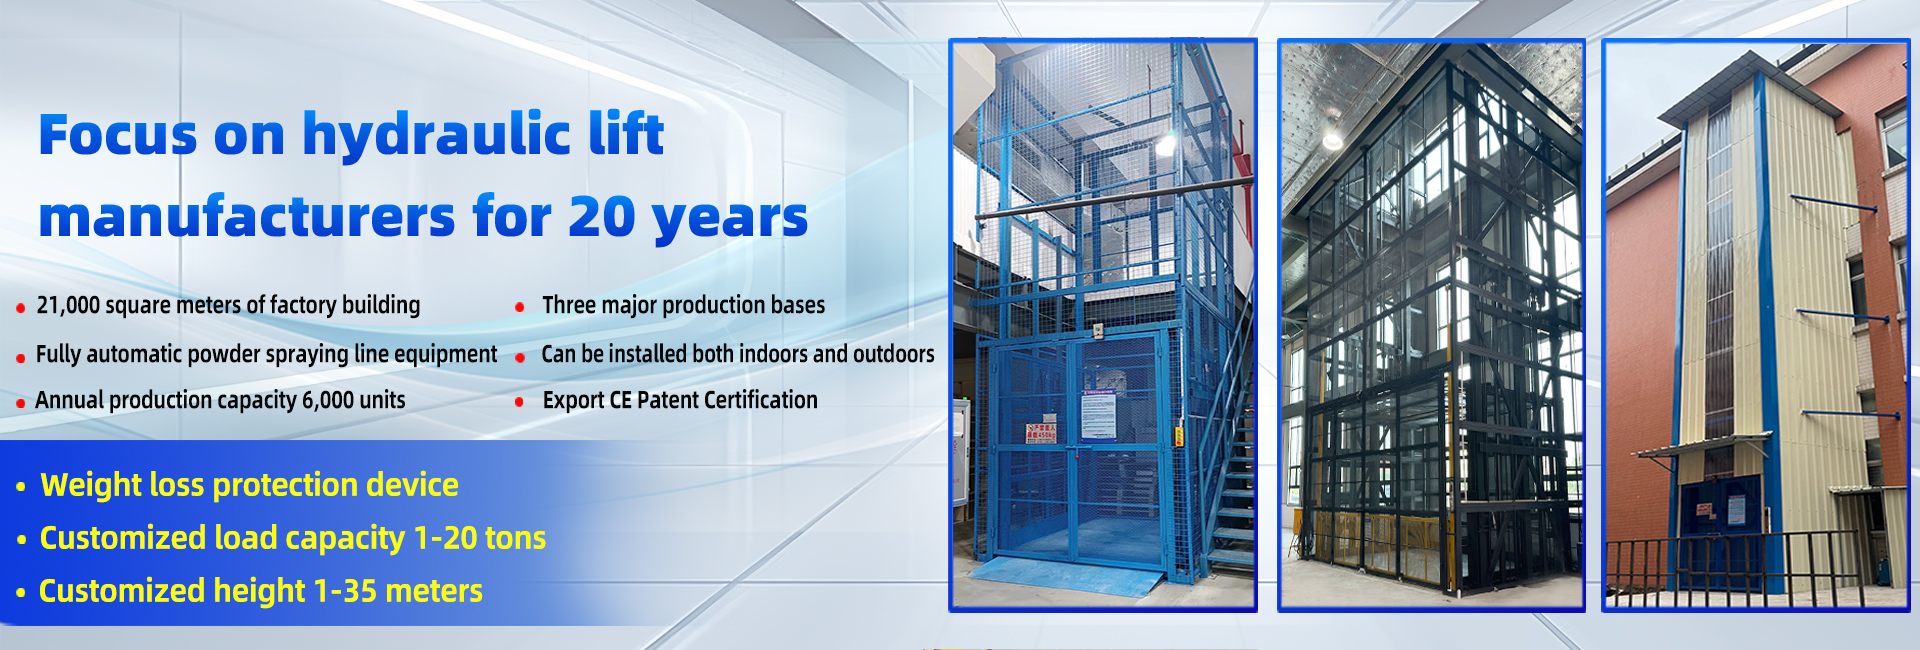 Focus on hydraulic lift manufacturers for 20 years